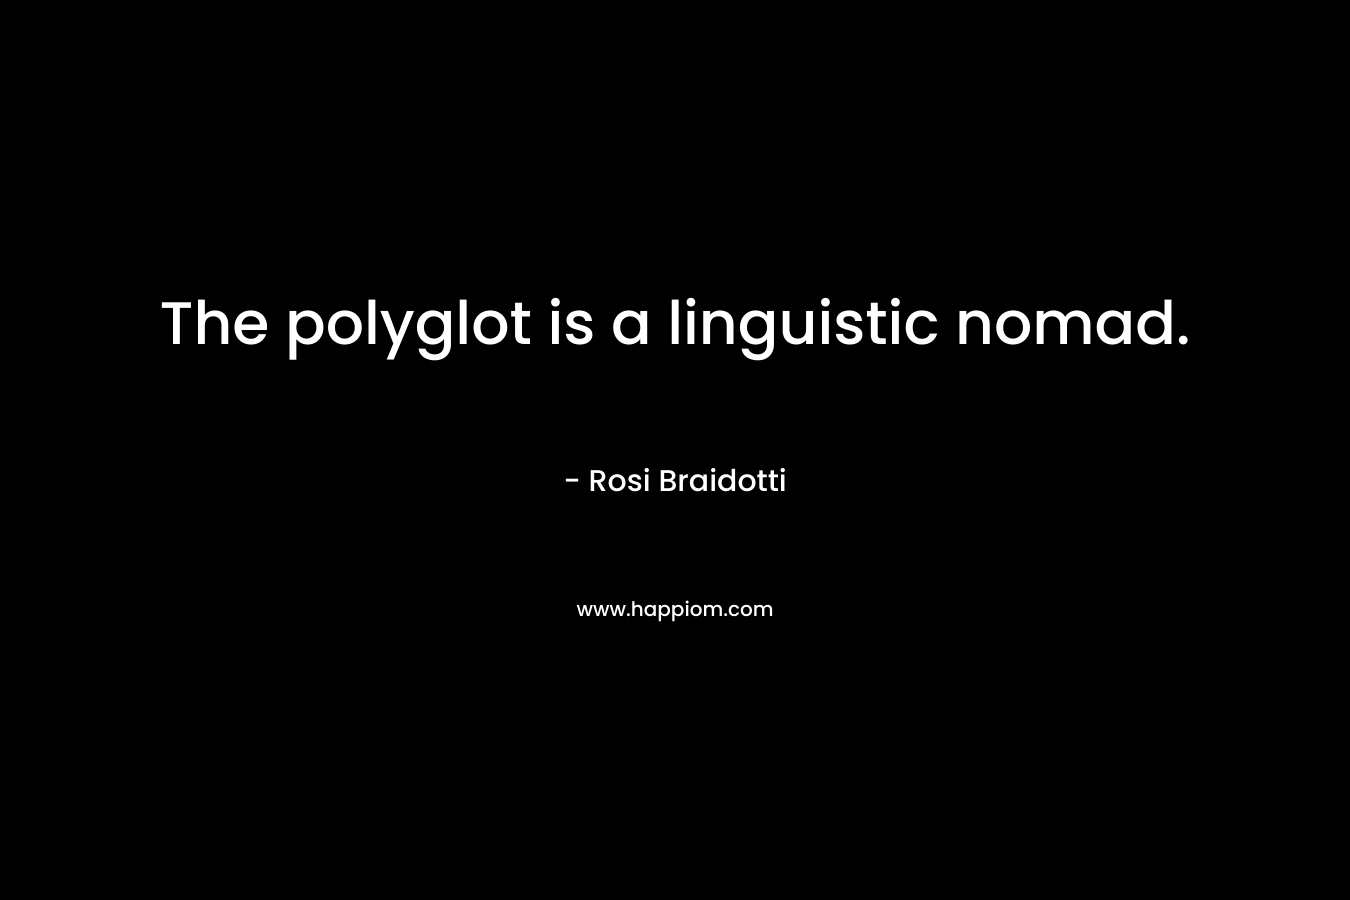 The polyglot is a linguistic nomad.